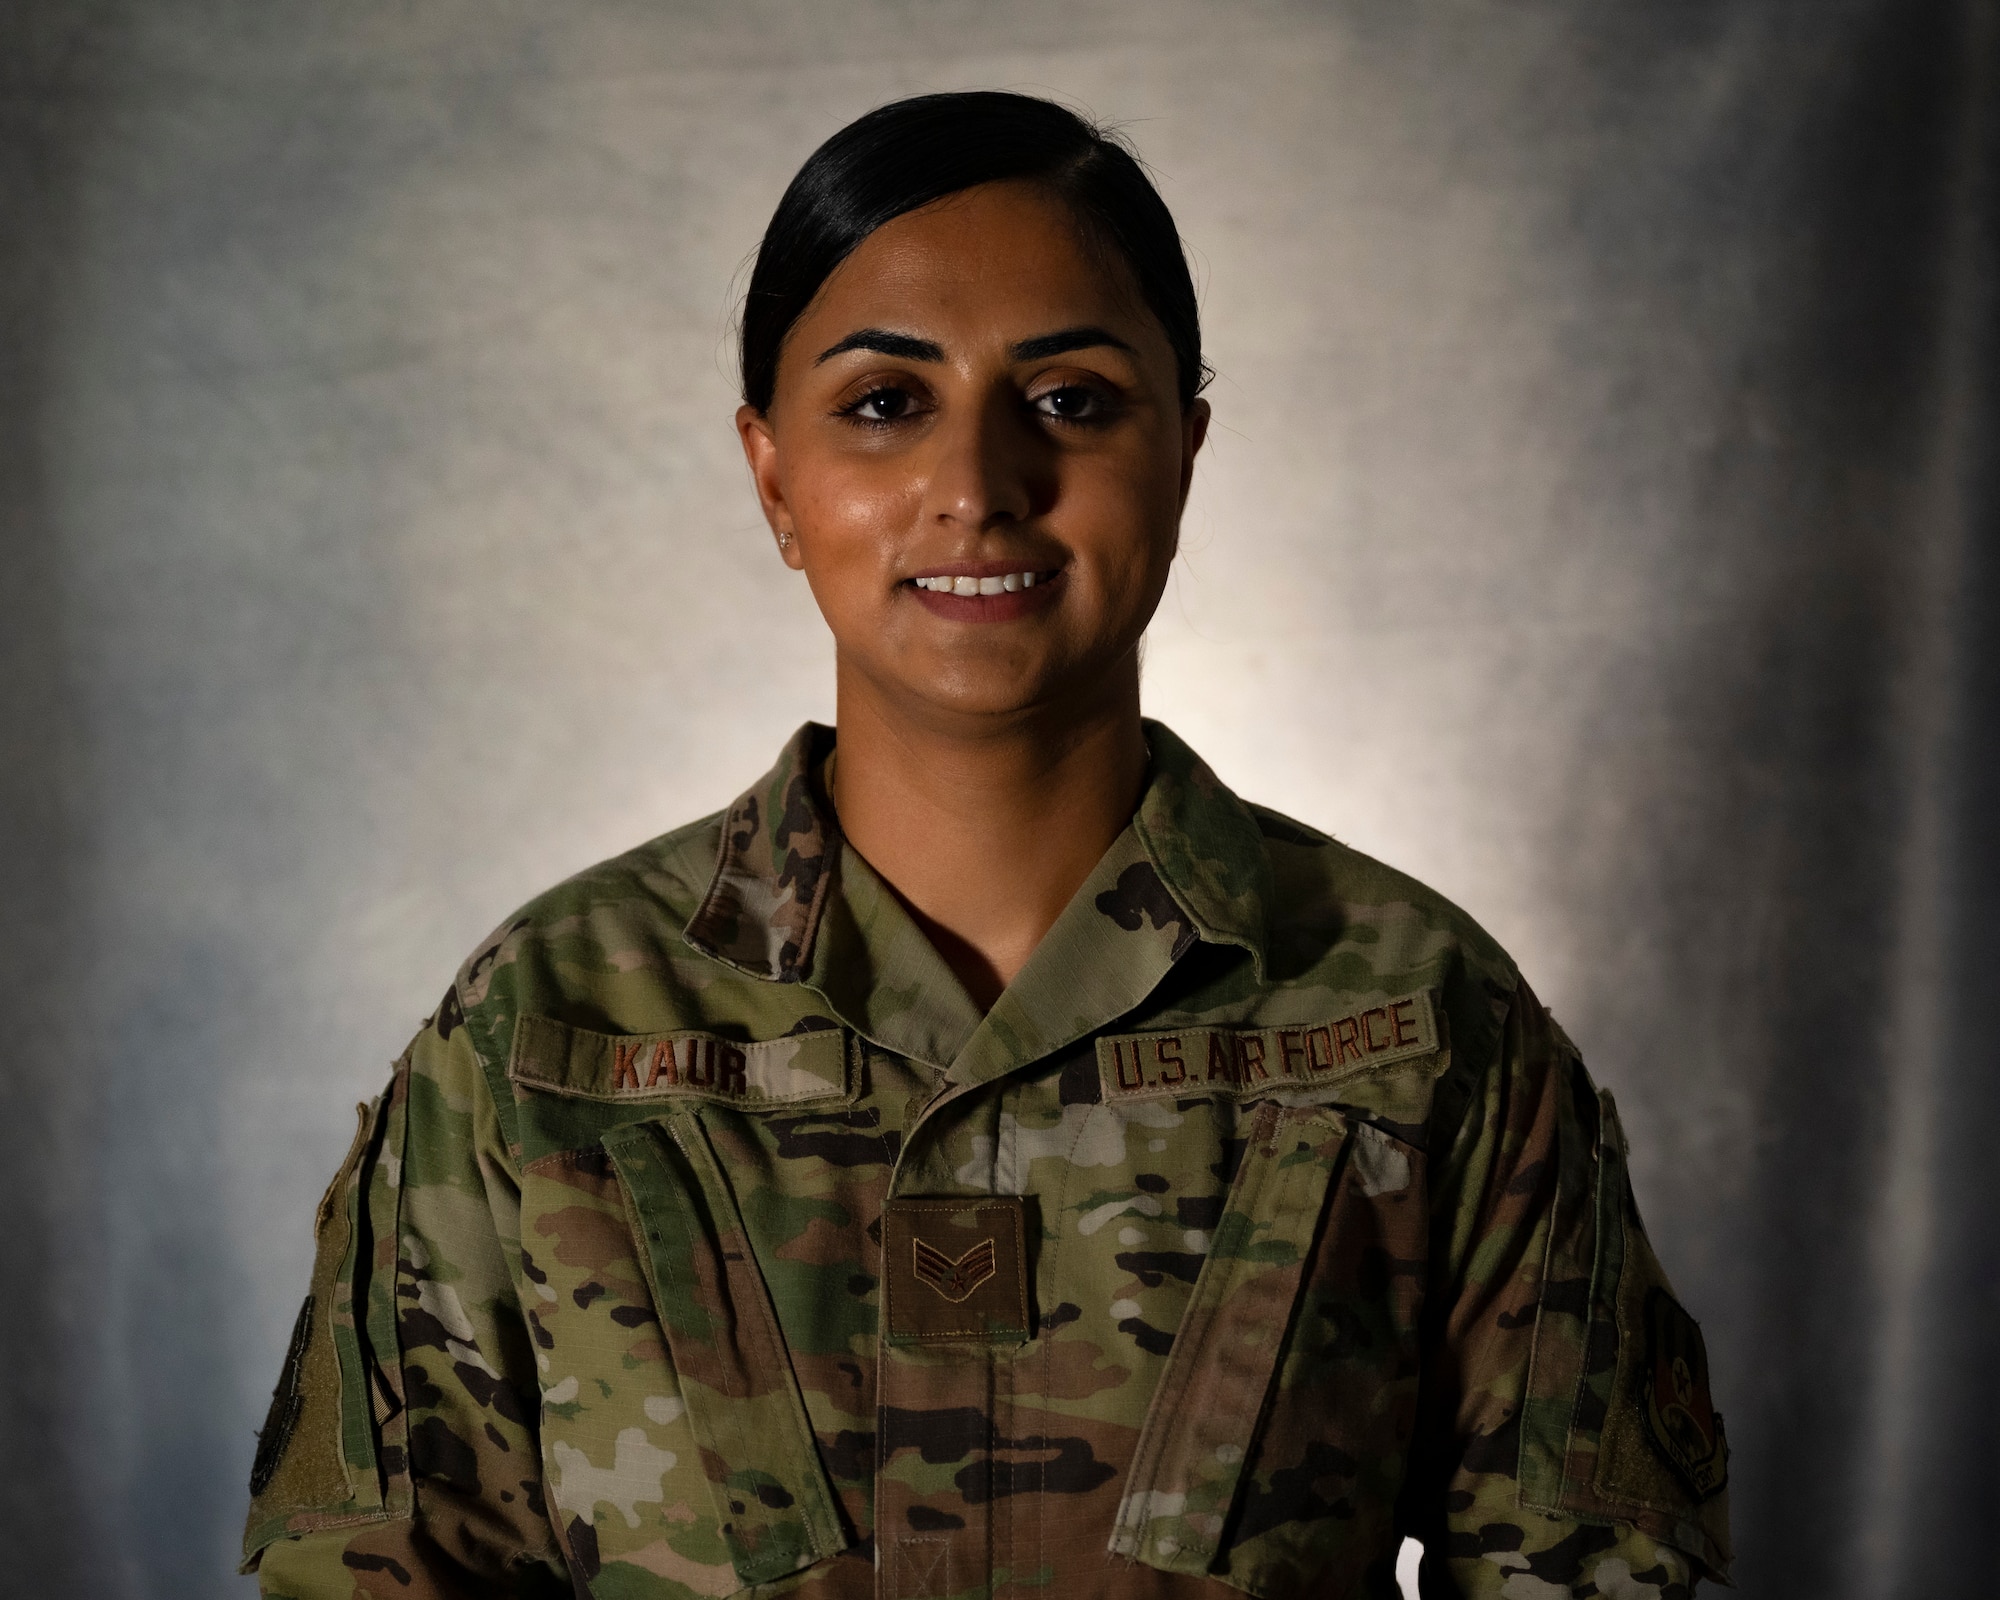 Senior Airman Ramandeep Kaur, assigned to the Office of Special Investigations 242nd Detachment Locally Employed Persons Screening Team, poses for a photo at Ali Al Salem Air Base, Kuwait, Oct. 19, 2021.